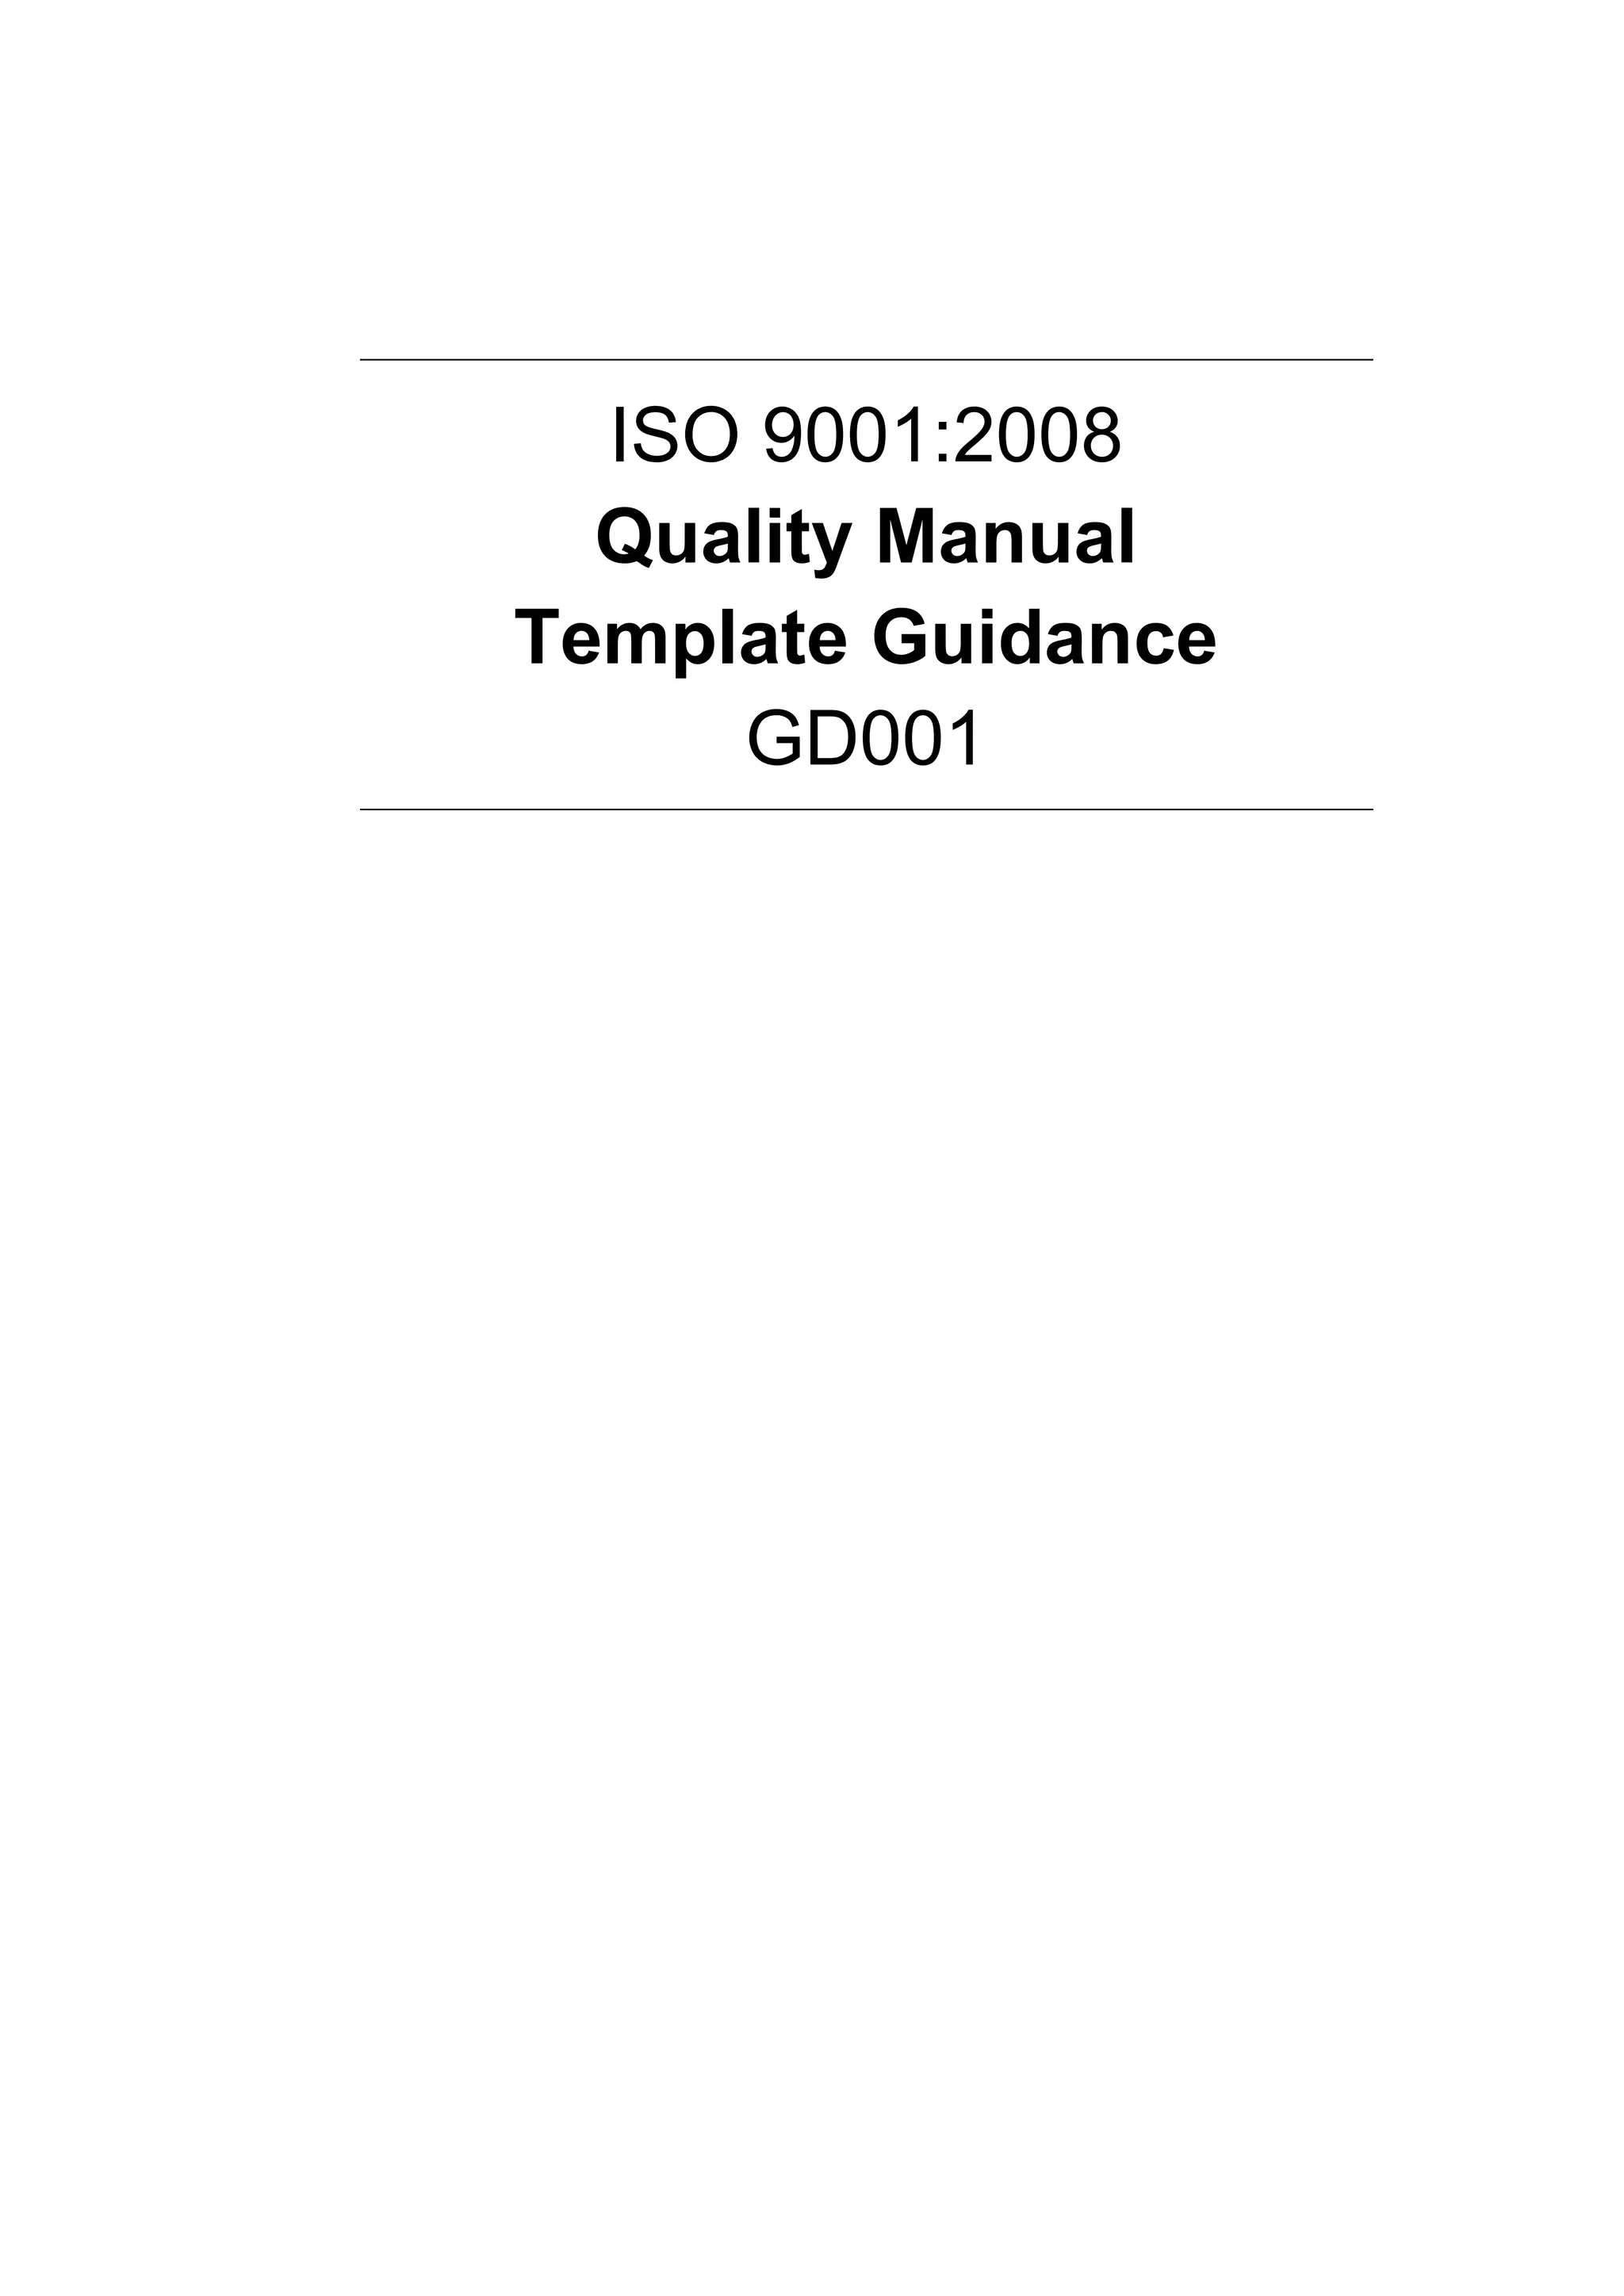 Quality manual-template-guidance-example | PDF